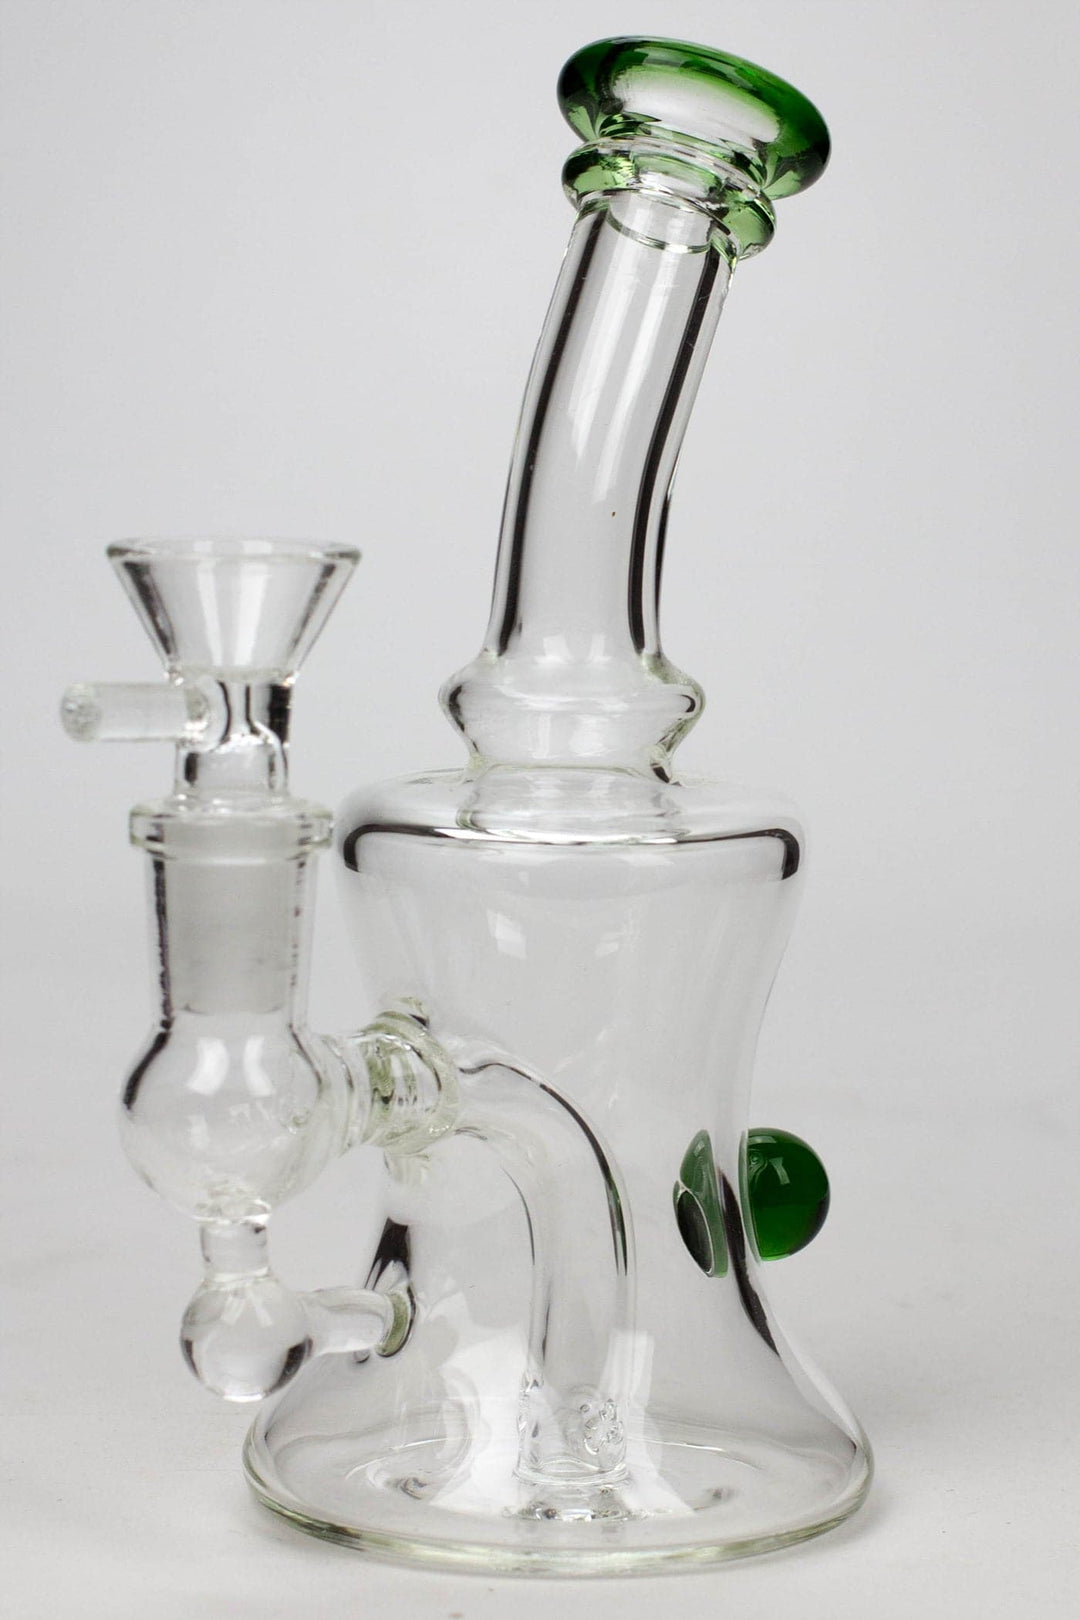 Fixed 3 hole diffuser skirt bubbler_11